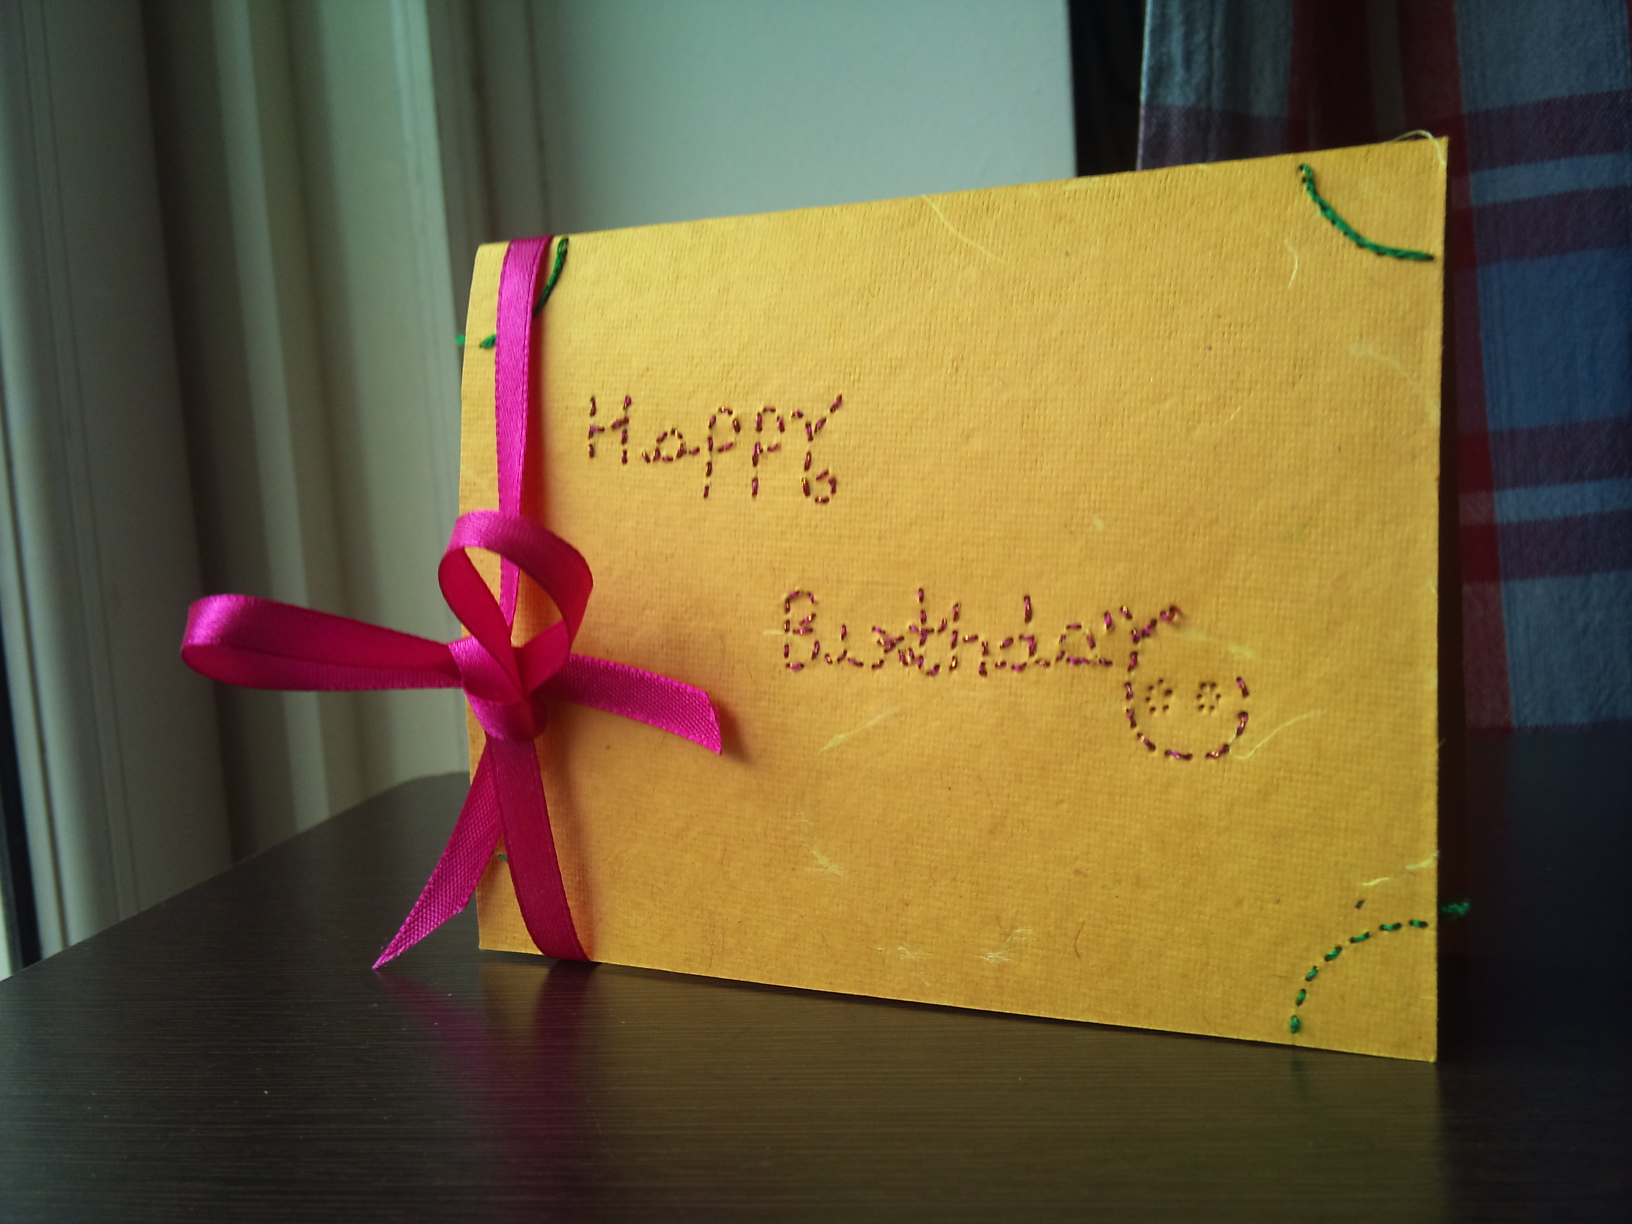 A card on the occasion of birthday.